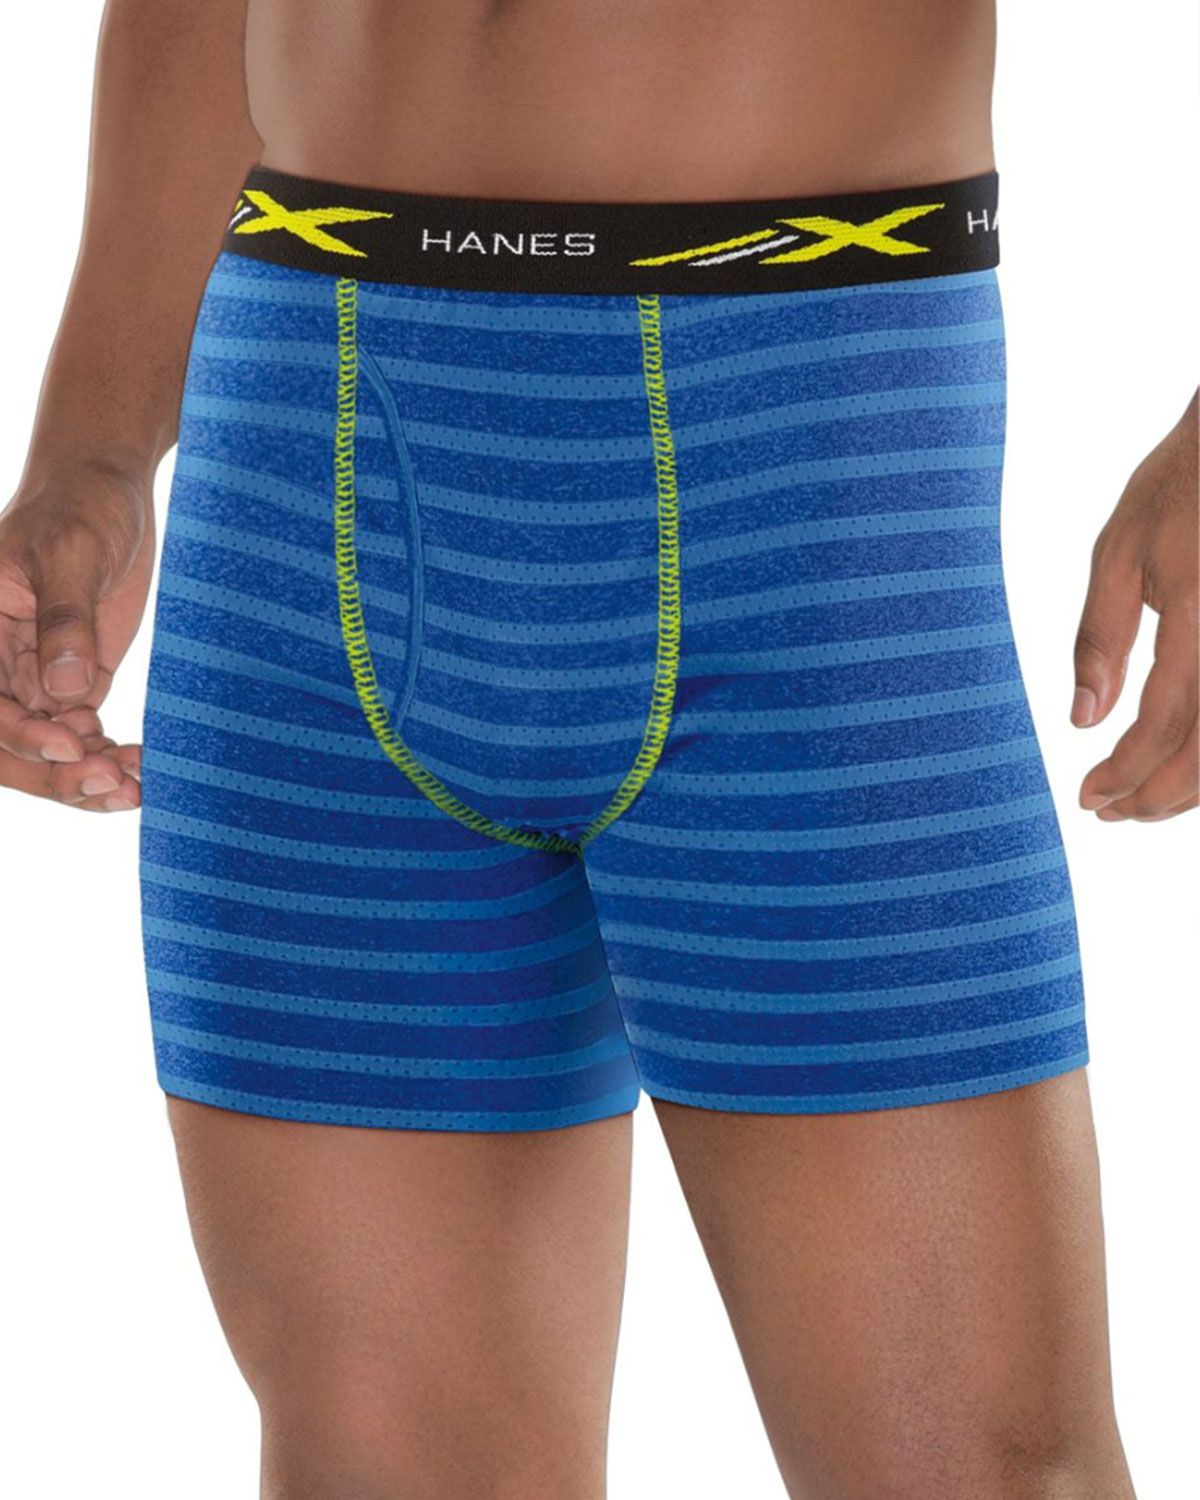 UPC 738994955395 product image for Hanes XTMCP1 Men's X-Temp Mesh Performance Boxer Briefs 1-Pack - Assorted - S | upcitemdb.com